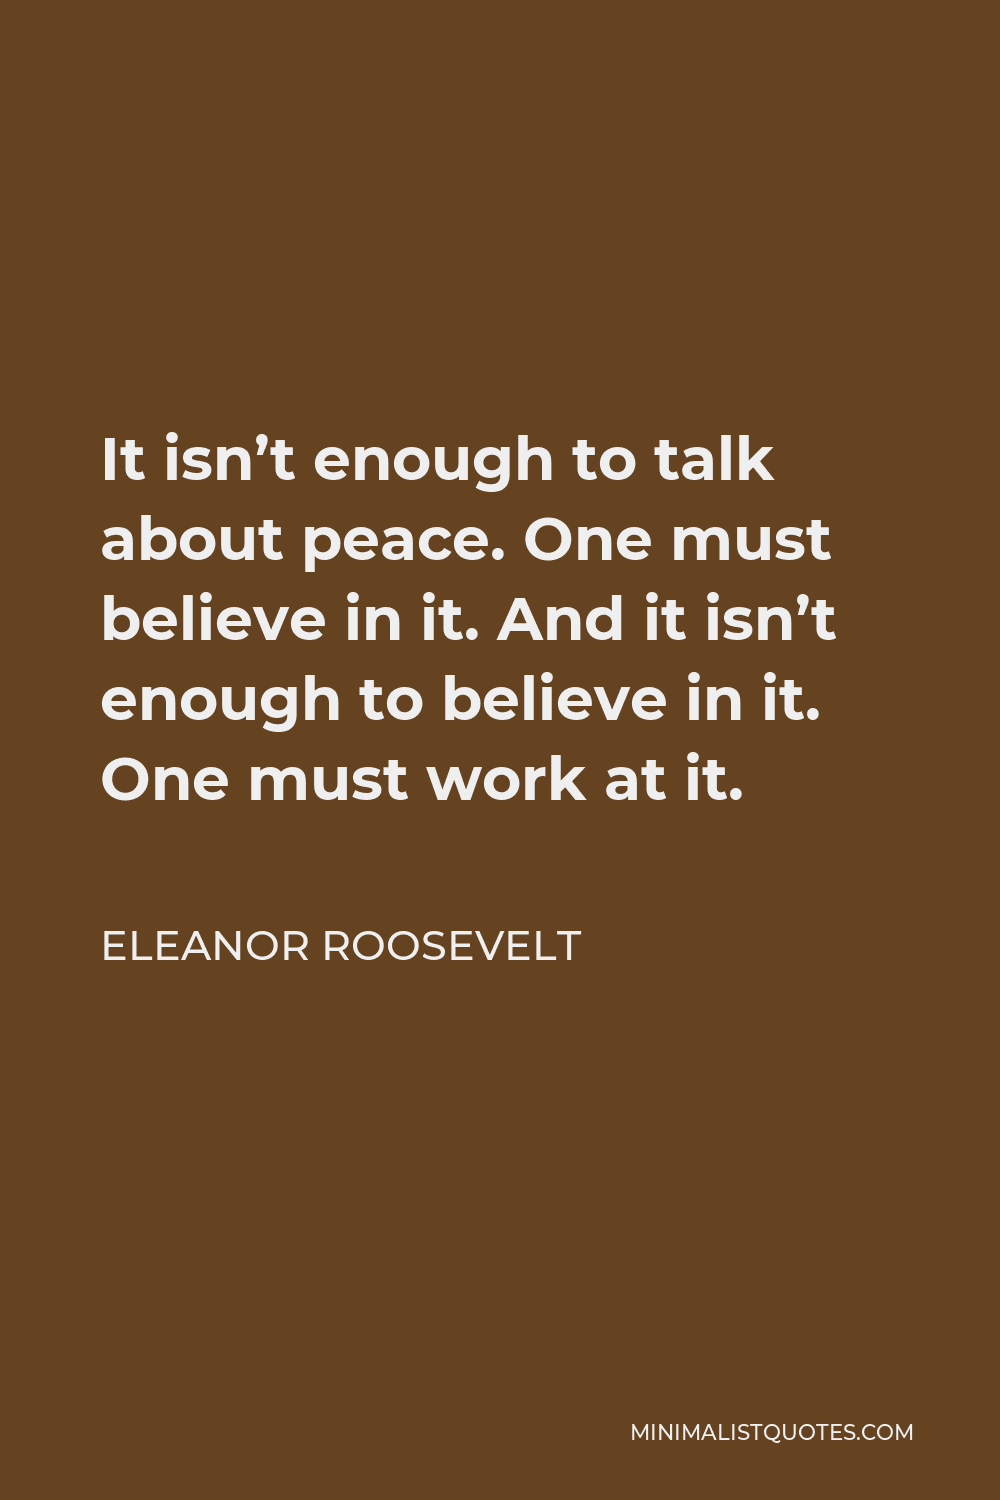 Eleanor Roosevelt Quote - It isn’t enough to talk about peace. One must believe in it. And it isn’t enough to believe in it. One must work at it.